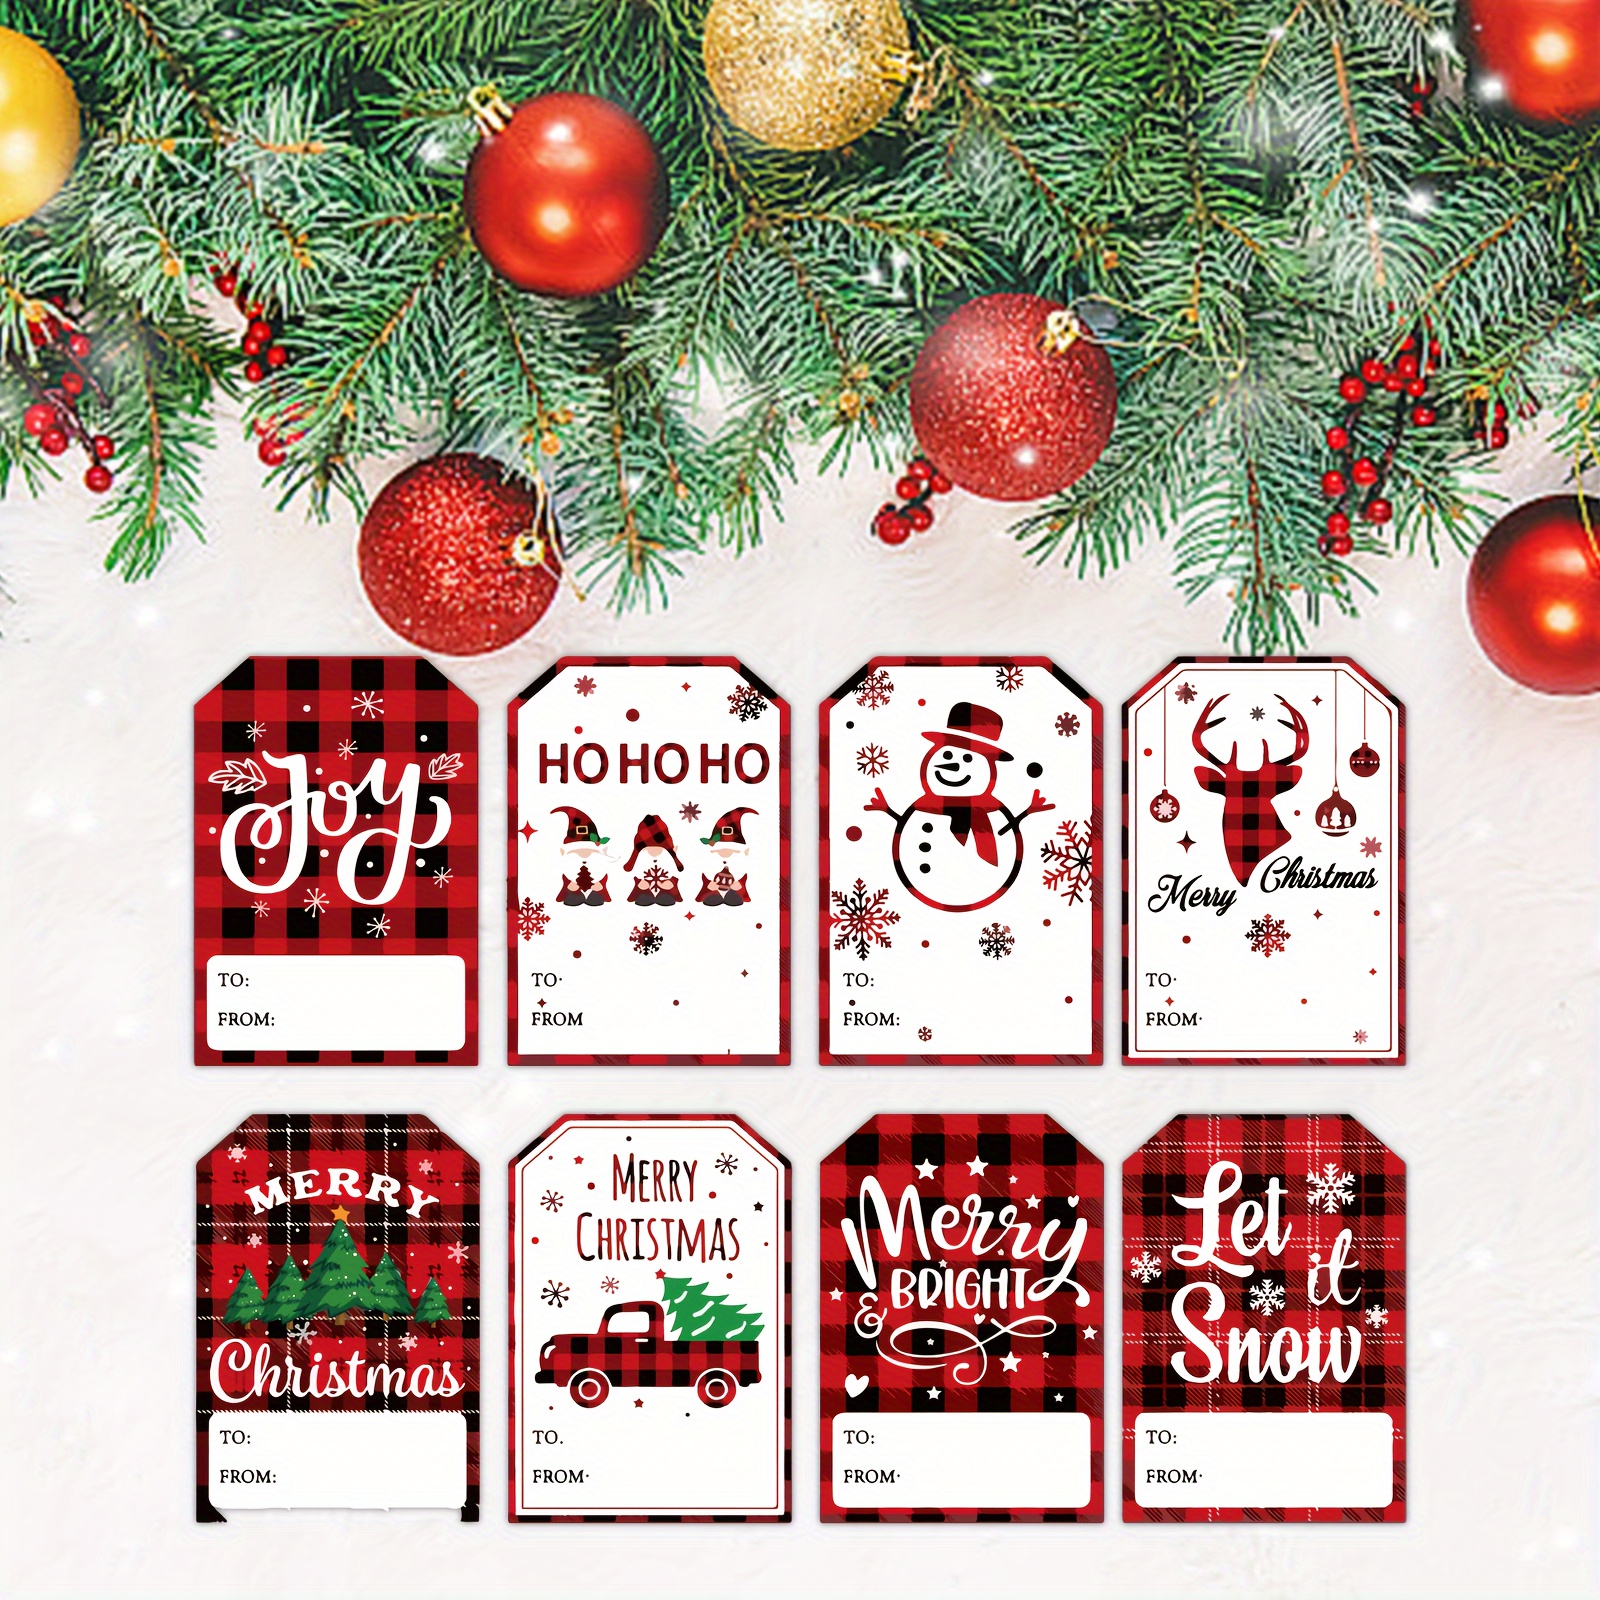 Christmas Gift Tags Stickers,300 Christmas Labels for Gifts Stickers  Rolls,2X3 Christmas Tags Stickers Self-Adhesive,Sticker Gift Tags for  Christmas